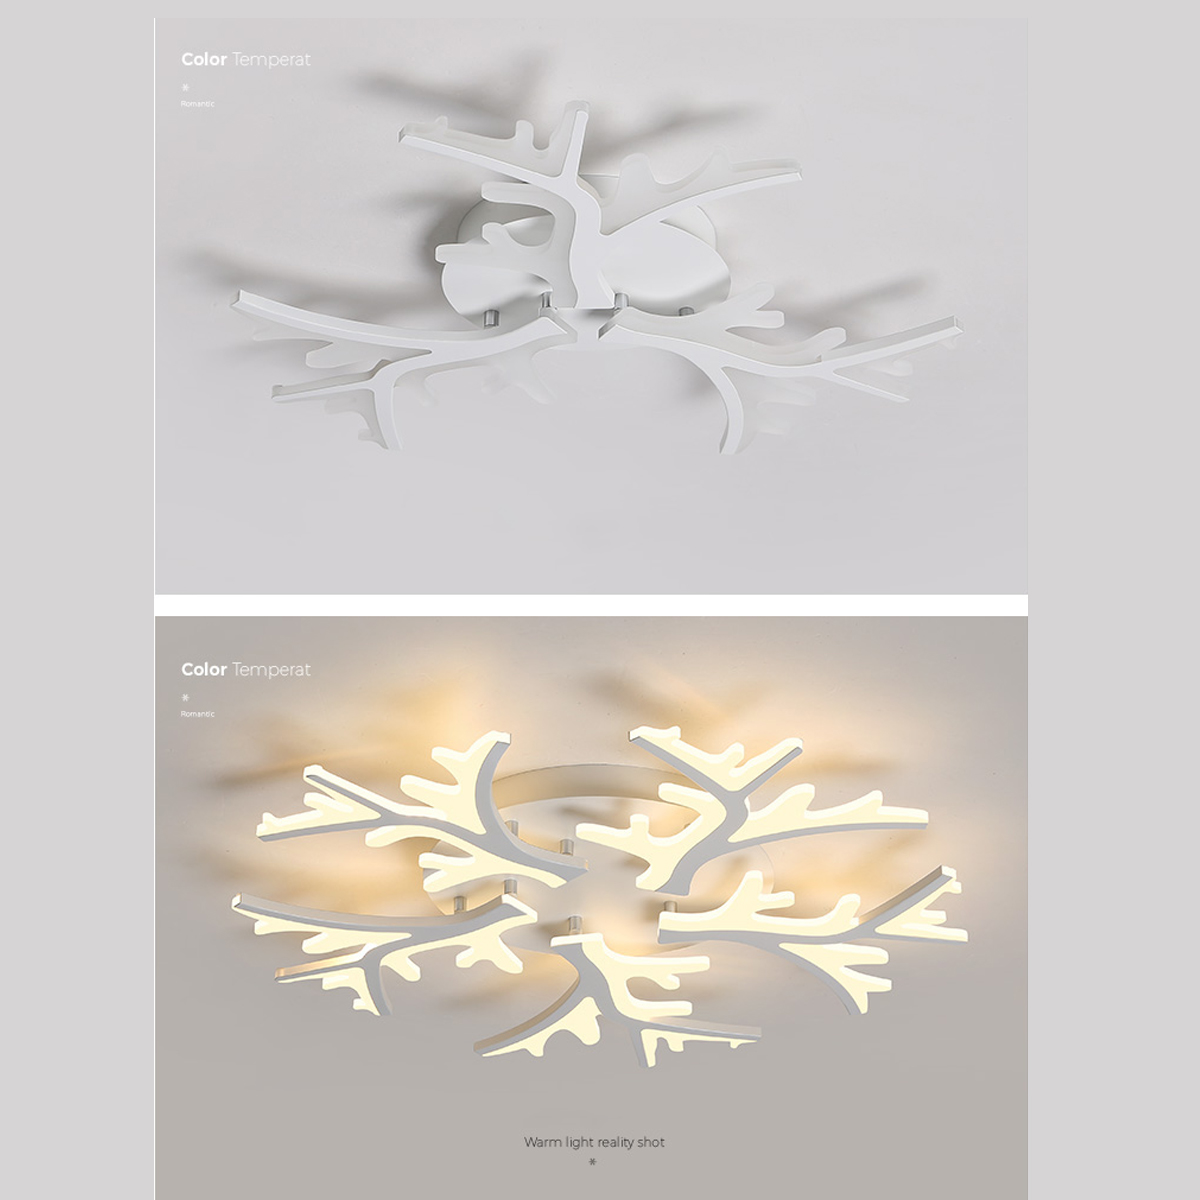 LED-Ceiling-Light-Pendant-Lamp-Hallway-Bedroom-Dimmable-Remote-Fixture-Decor-1795825-5